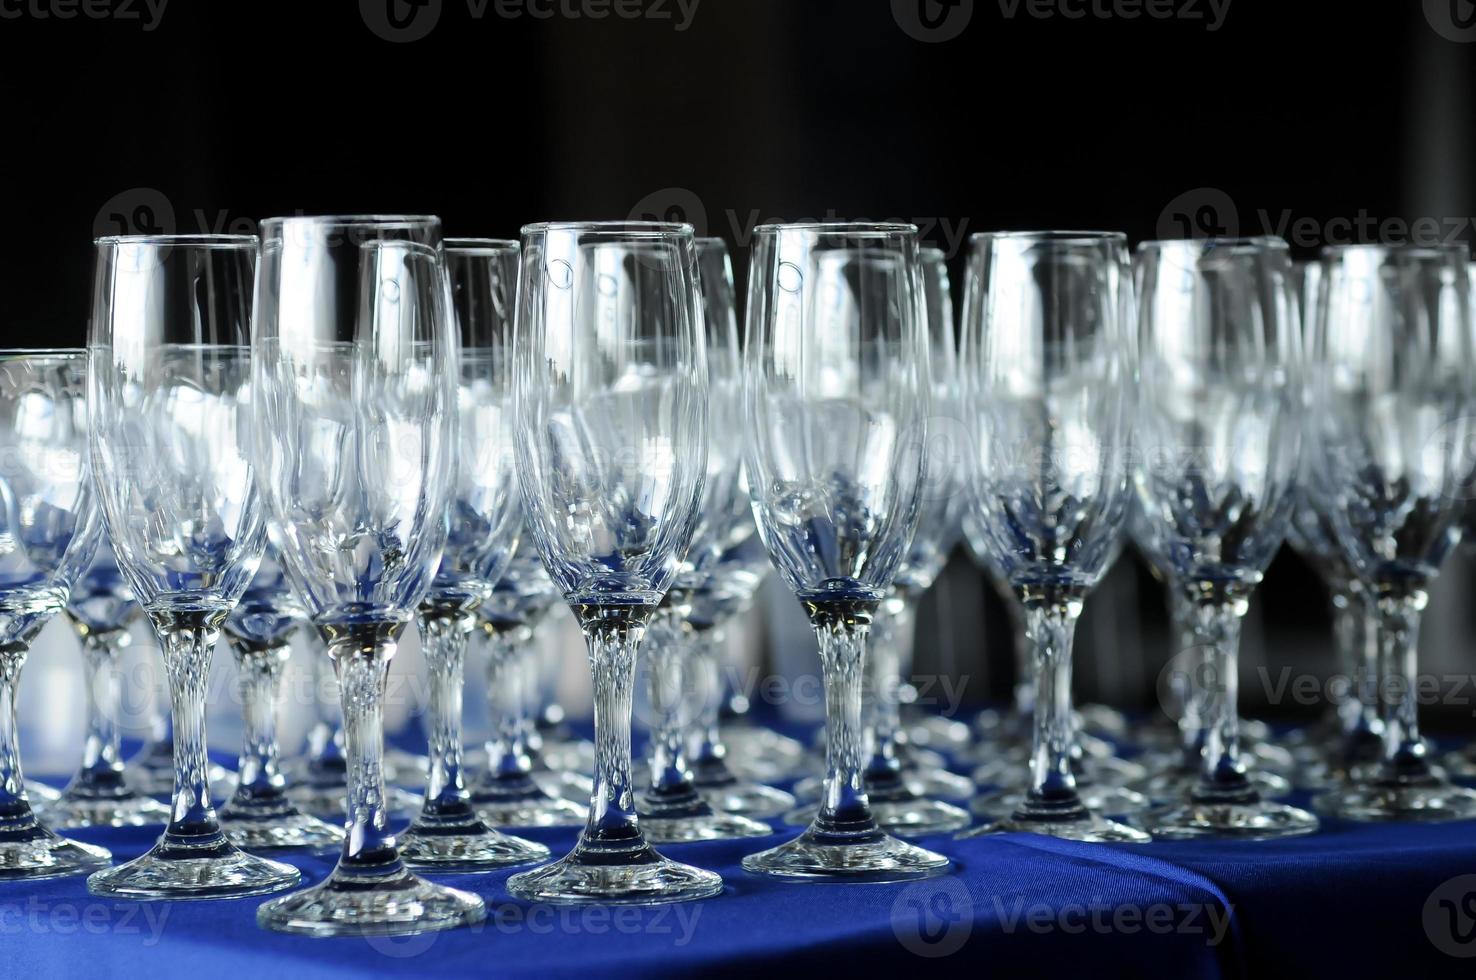 Many wine glasses on a party table photo